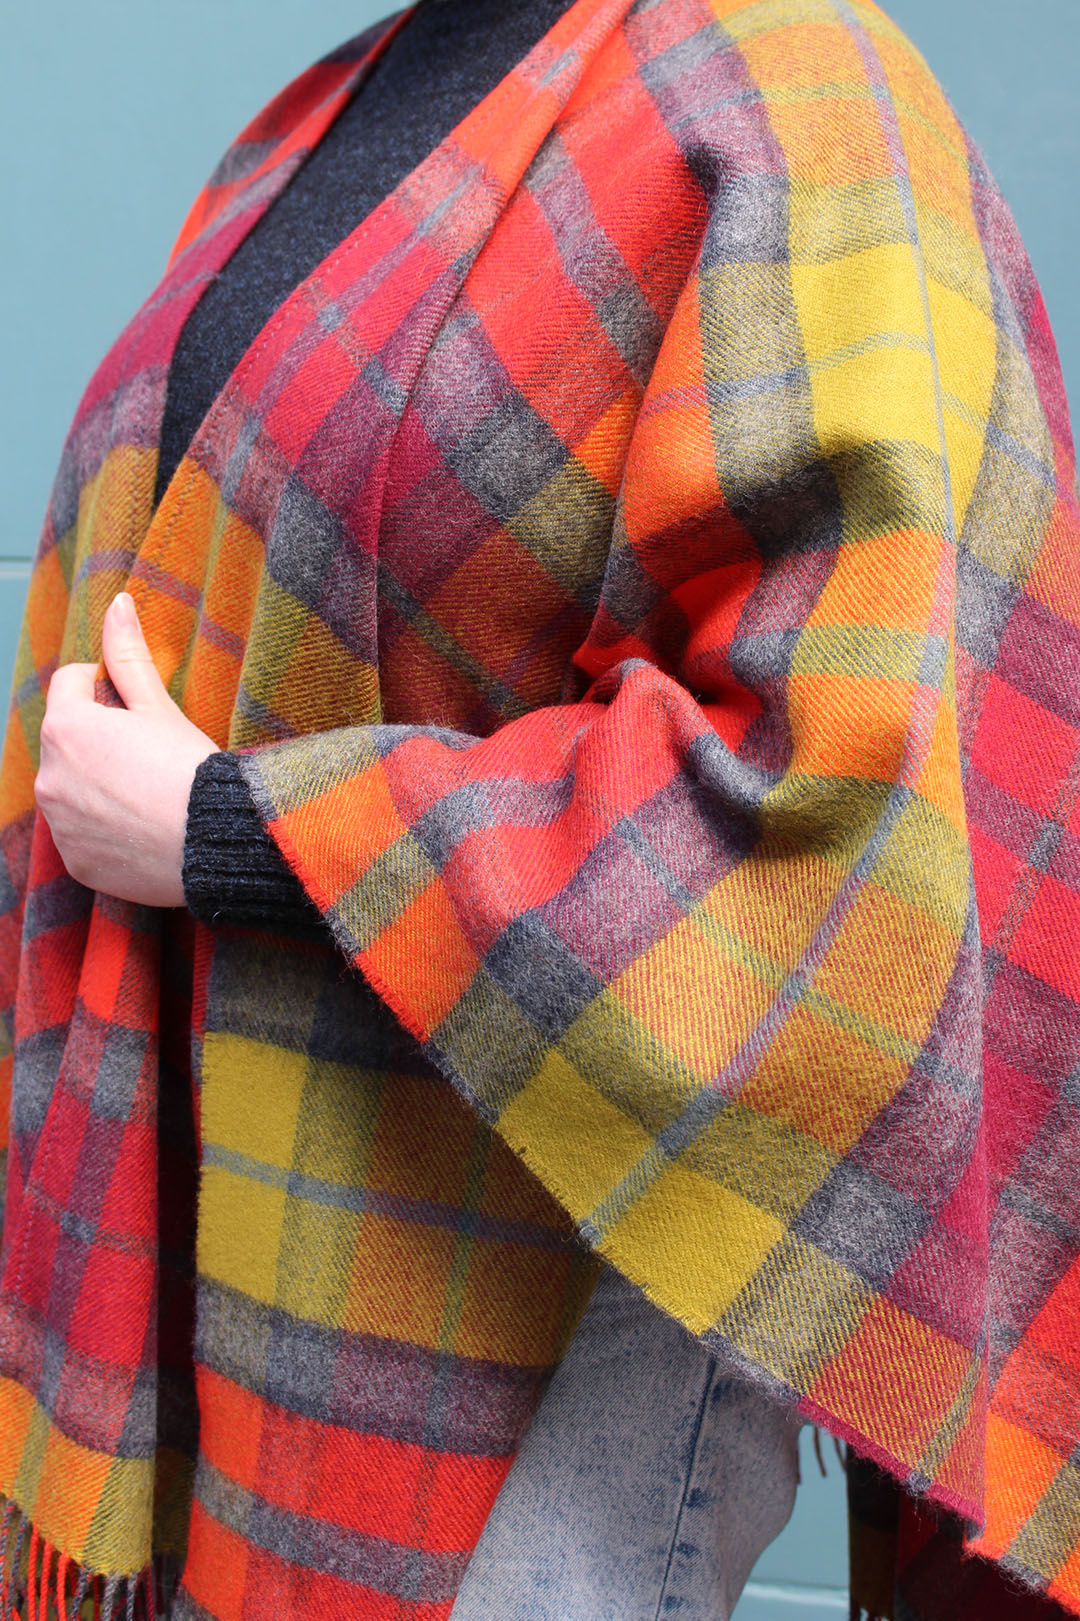 The Buchanan Berry tartan serape features a bold check in an eye catching combination of red, orange, chartreuse and grey.